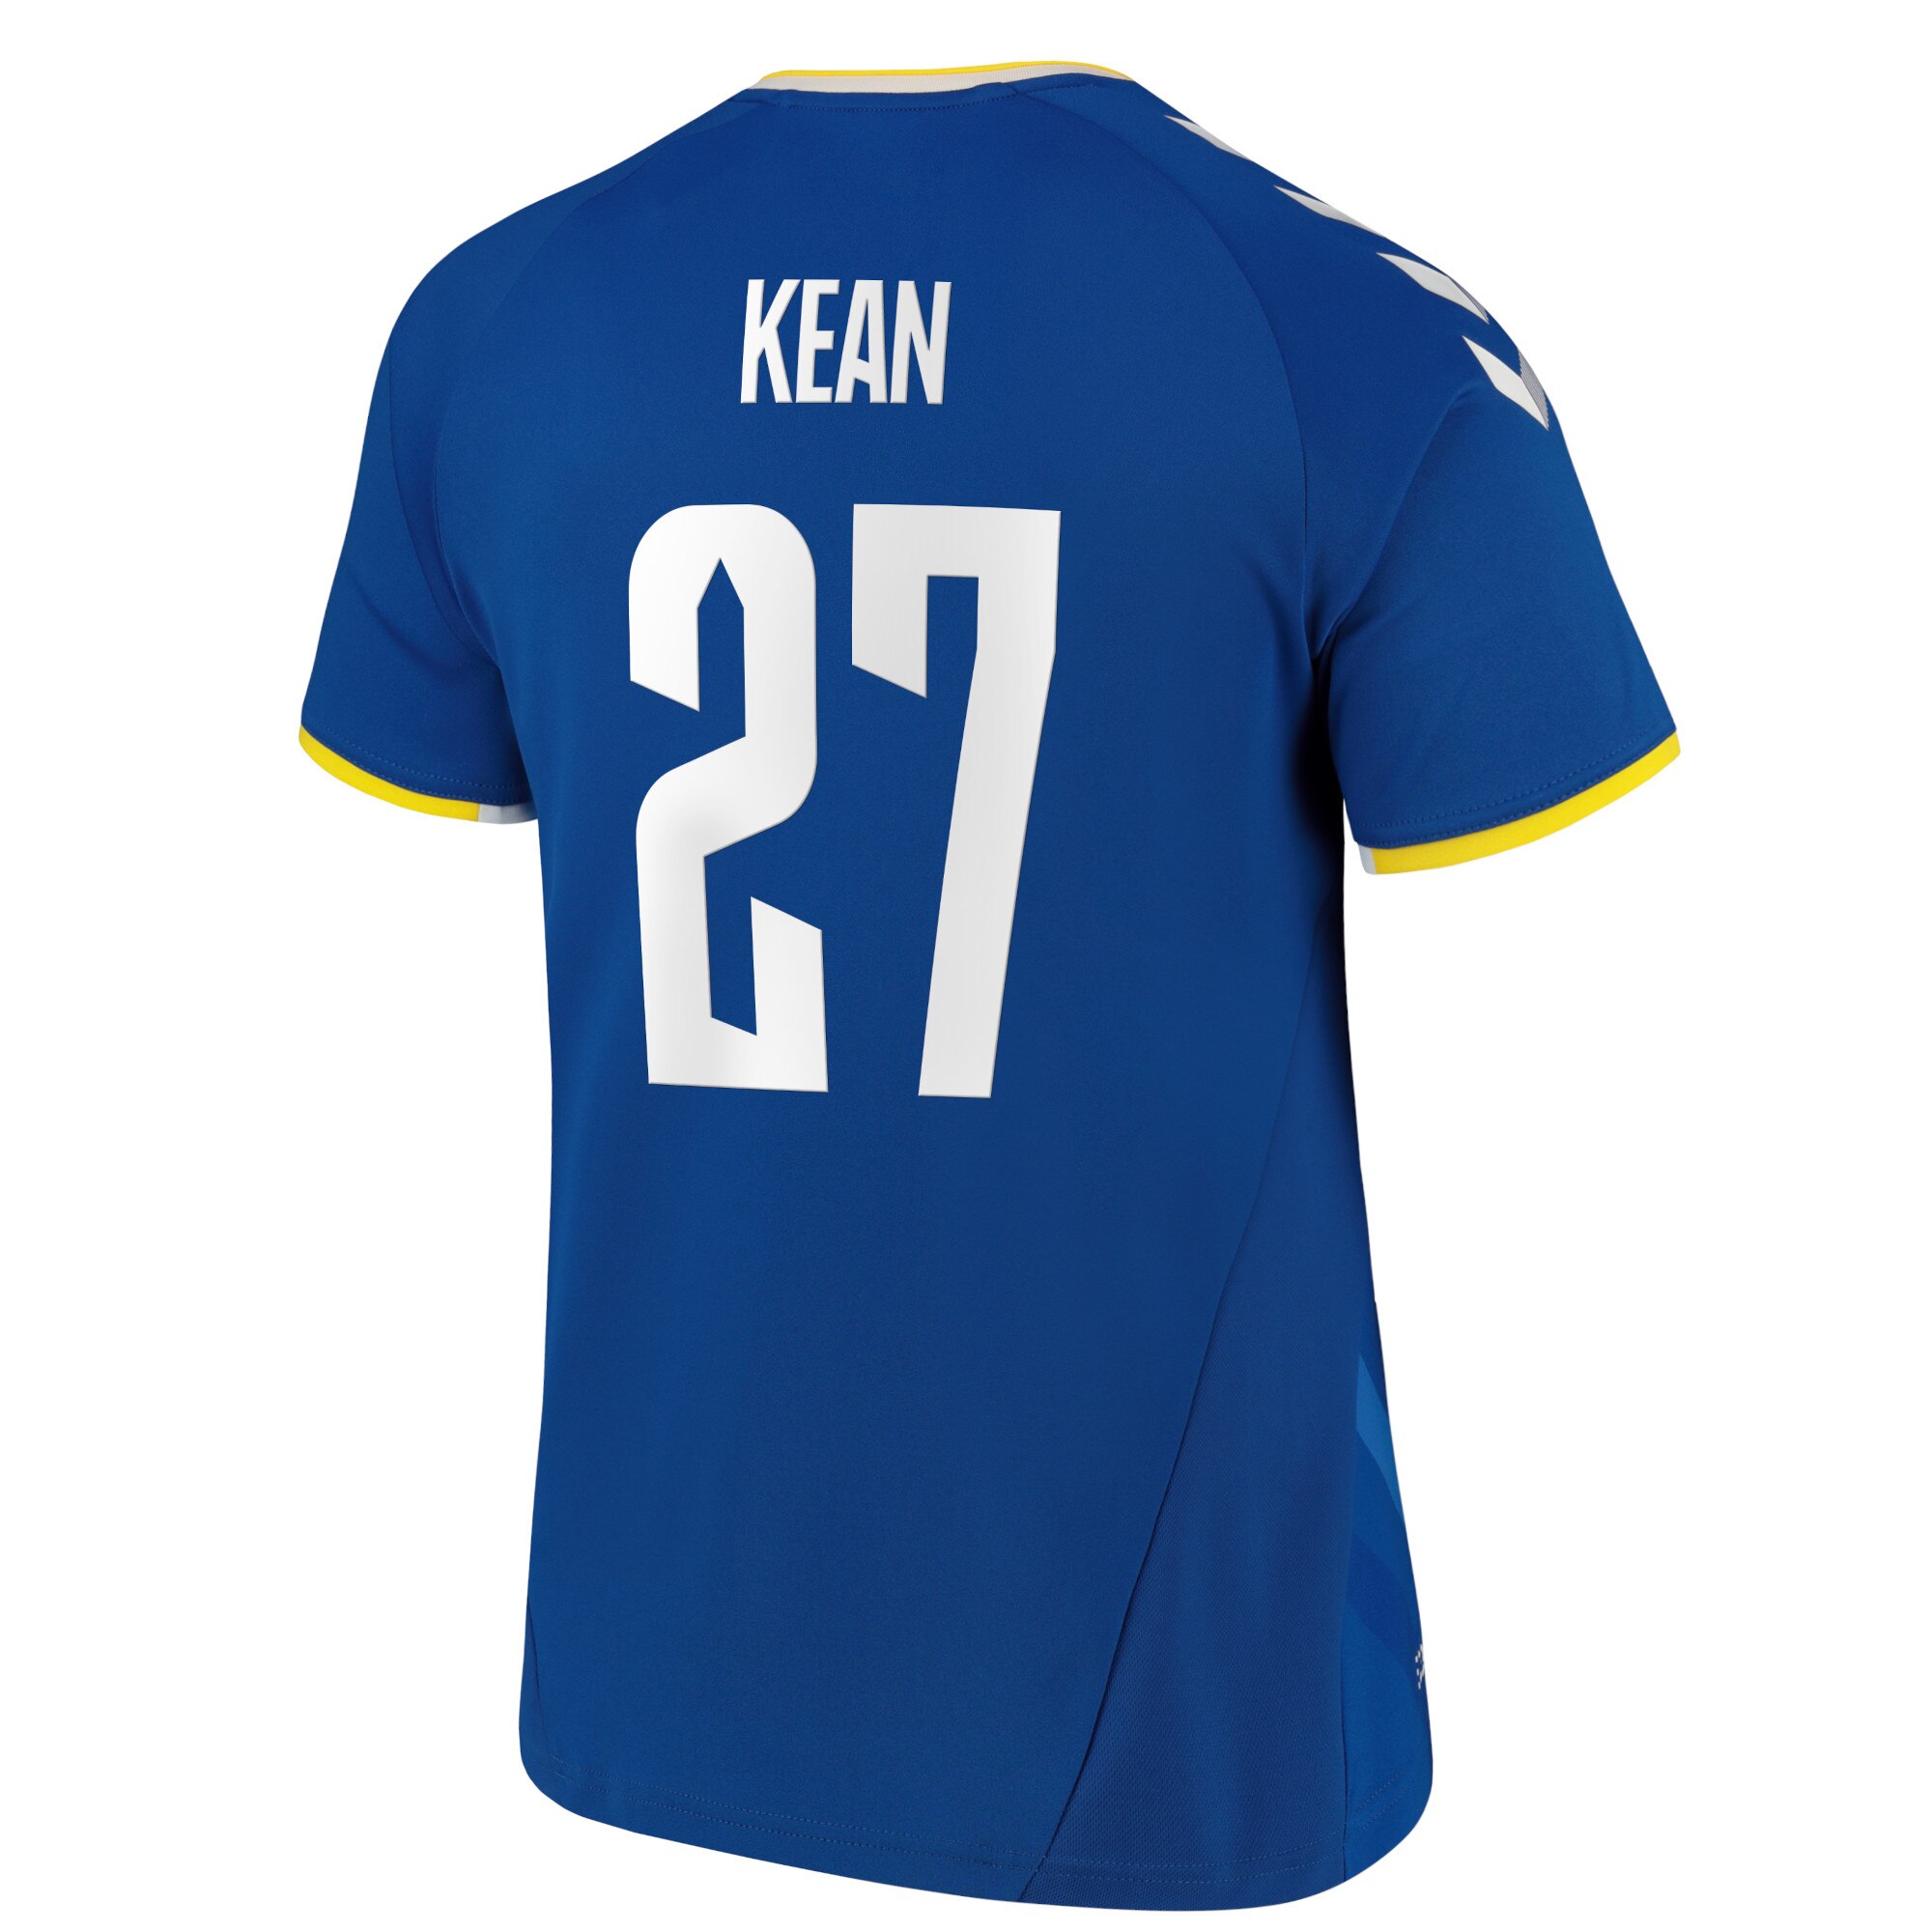 Everton Cup Home Shirt - 2021-22 with Kean 27 printing